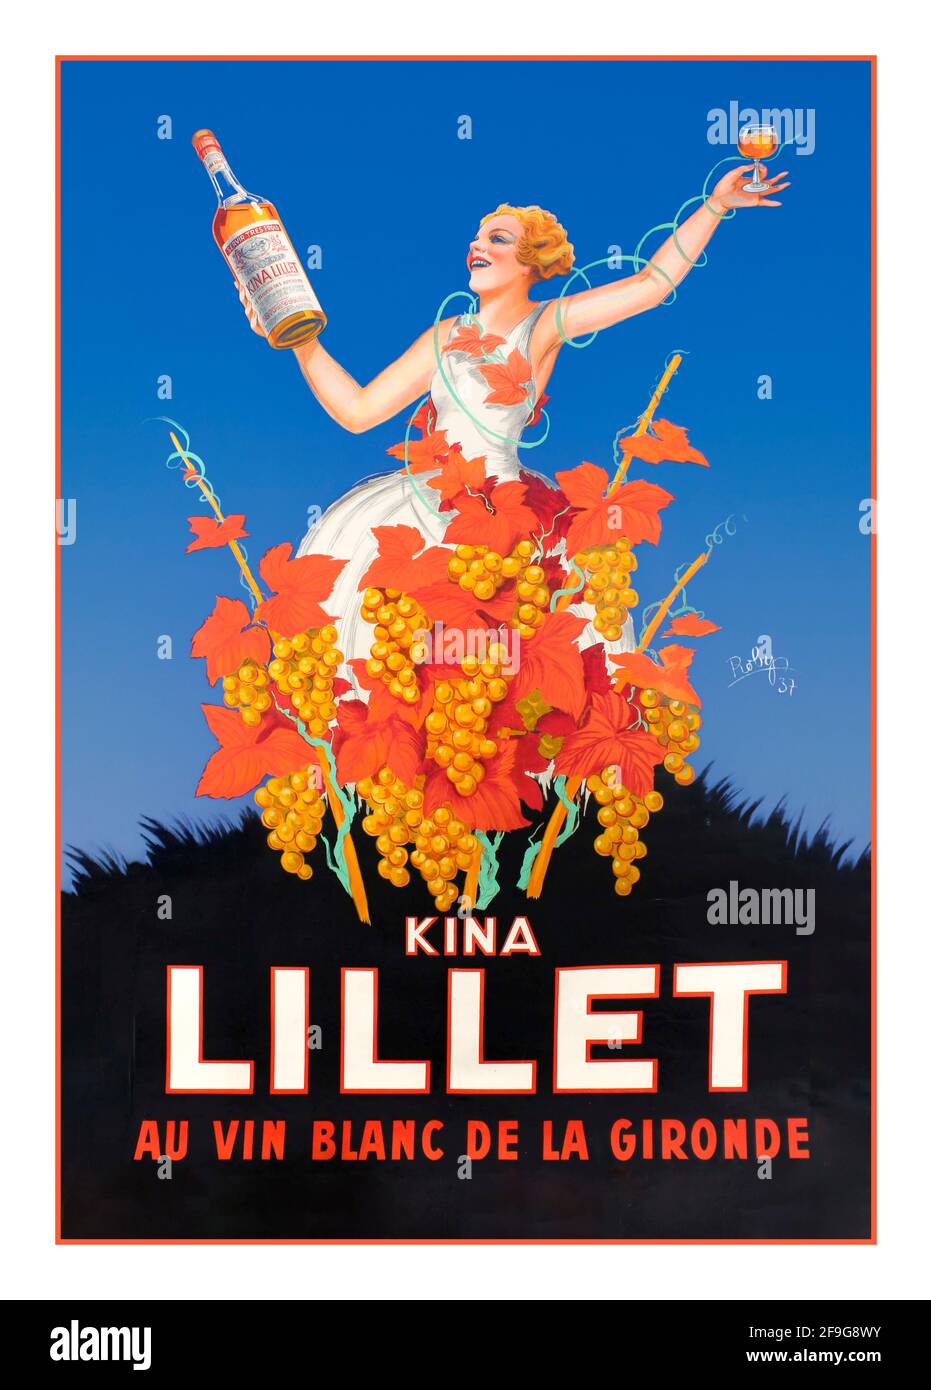 LILLET French drink poster 1930's lithograph vintage advertising promoting alcoholic white wine liqueur Kina Lillet. ' Kina Lillet - Au vin blanc de la gironde' appears below artwork of a woman with the product. Lillet classed as an aromatised wine within EU law,  a French wine-based aperitif from Podensac, a blend of 85% Bordeaux region wines (Semillon for the Blanc and for the Rosé, Merlot for the Rouge) and 15% macerated liqueurs, mostly citrus liqueurs (peels of sweet oranges from Spain and Morocco and peels of bitter green oranges from Haiti Stock Photo